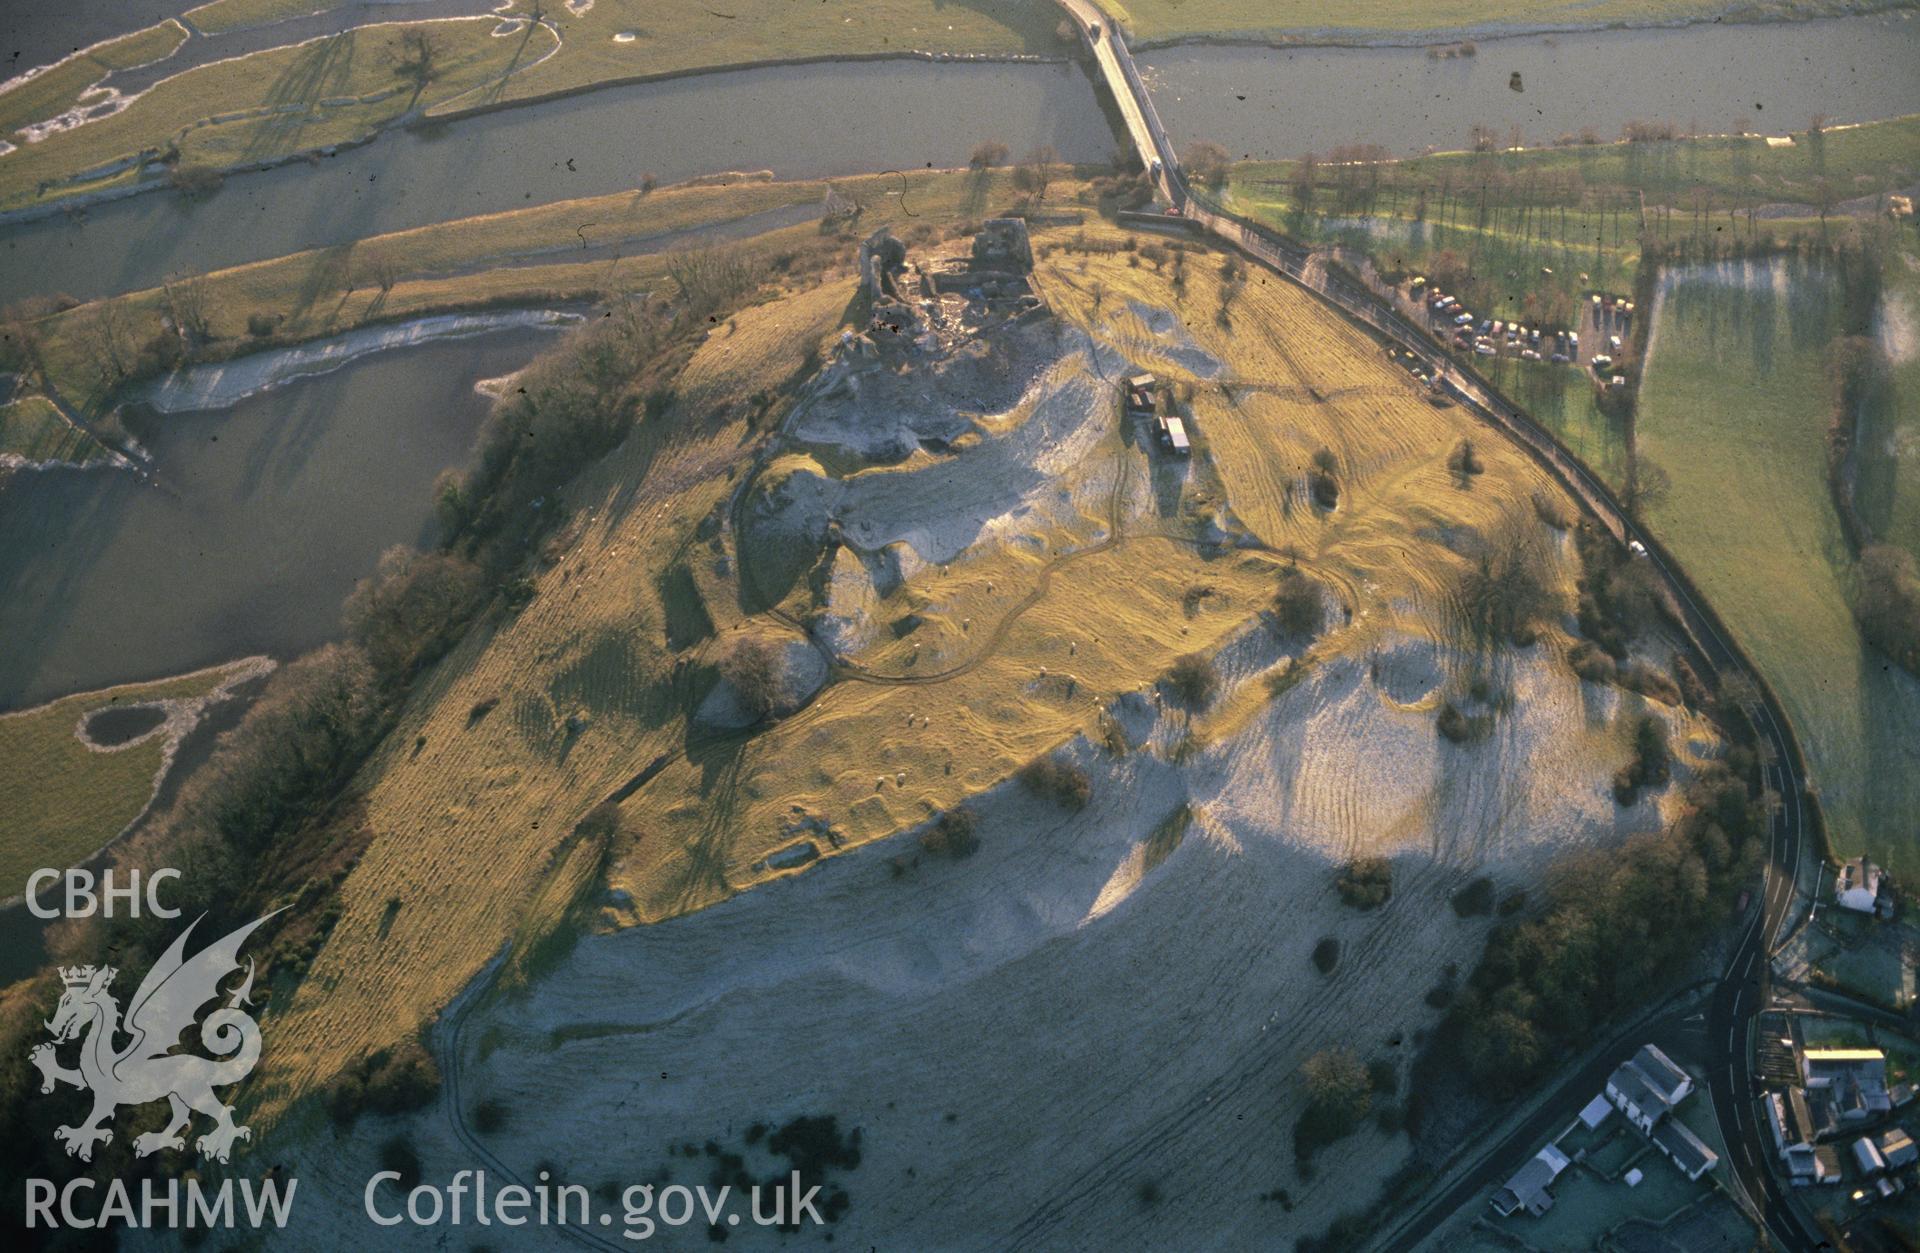 Slide of RCAHMW colour oblique aerial photograph of Dryslwyn Castle, taken by C.R. Musson, 13/1/1991.